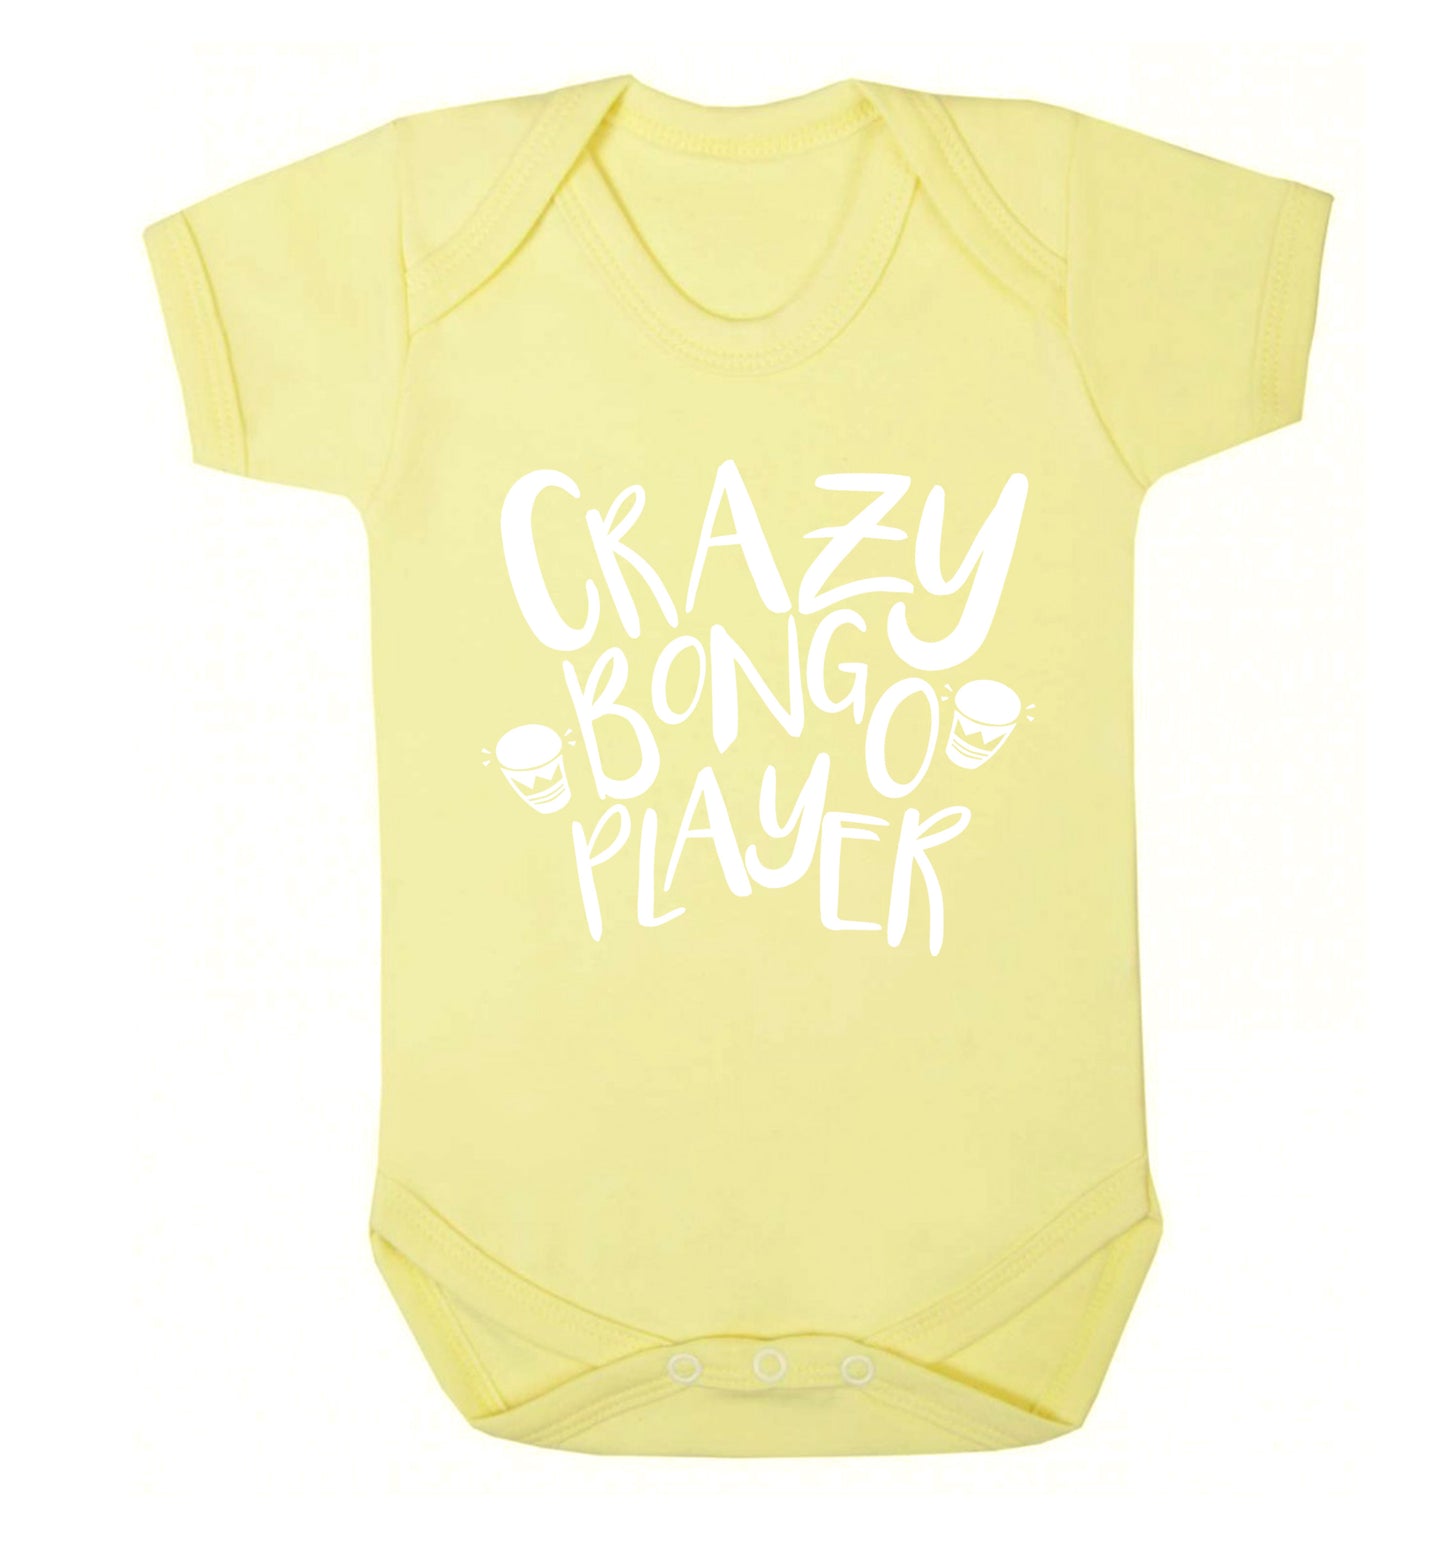 Crazy bongo player Baby Vest pale yellow 18-24 months